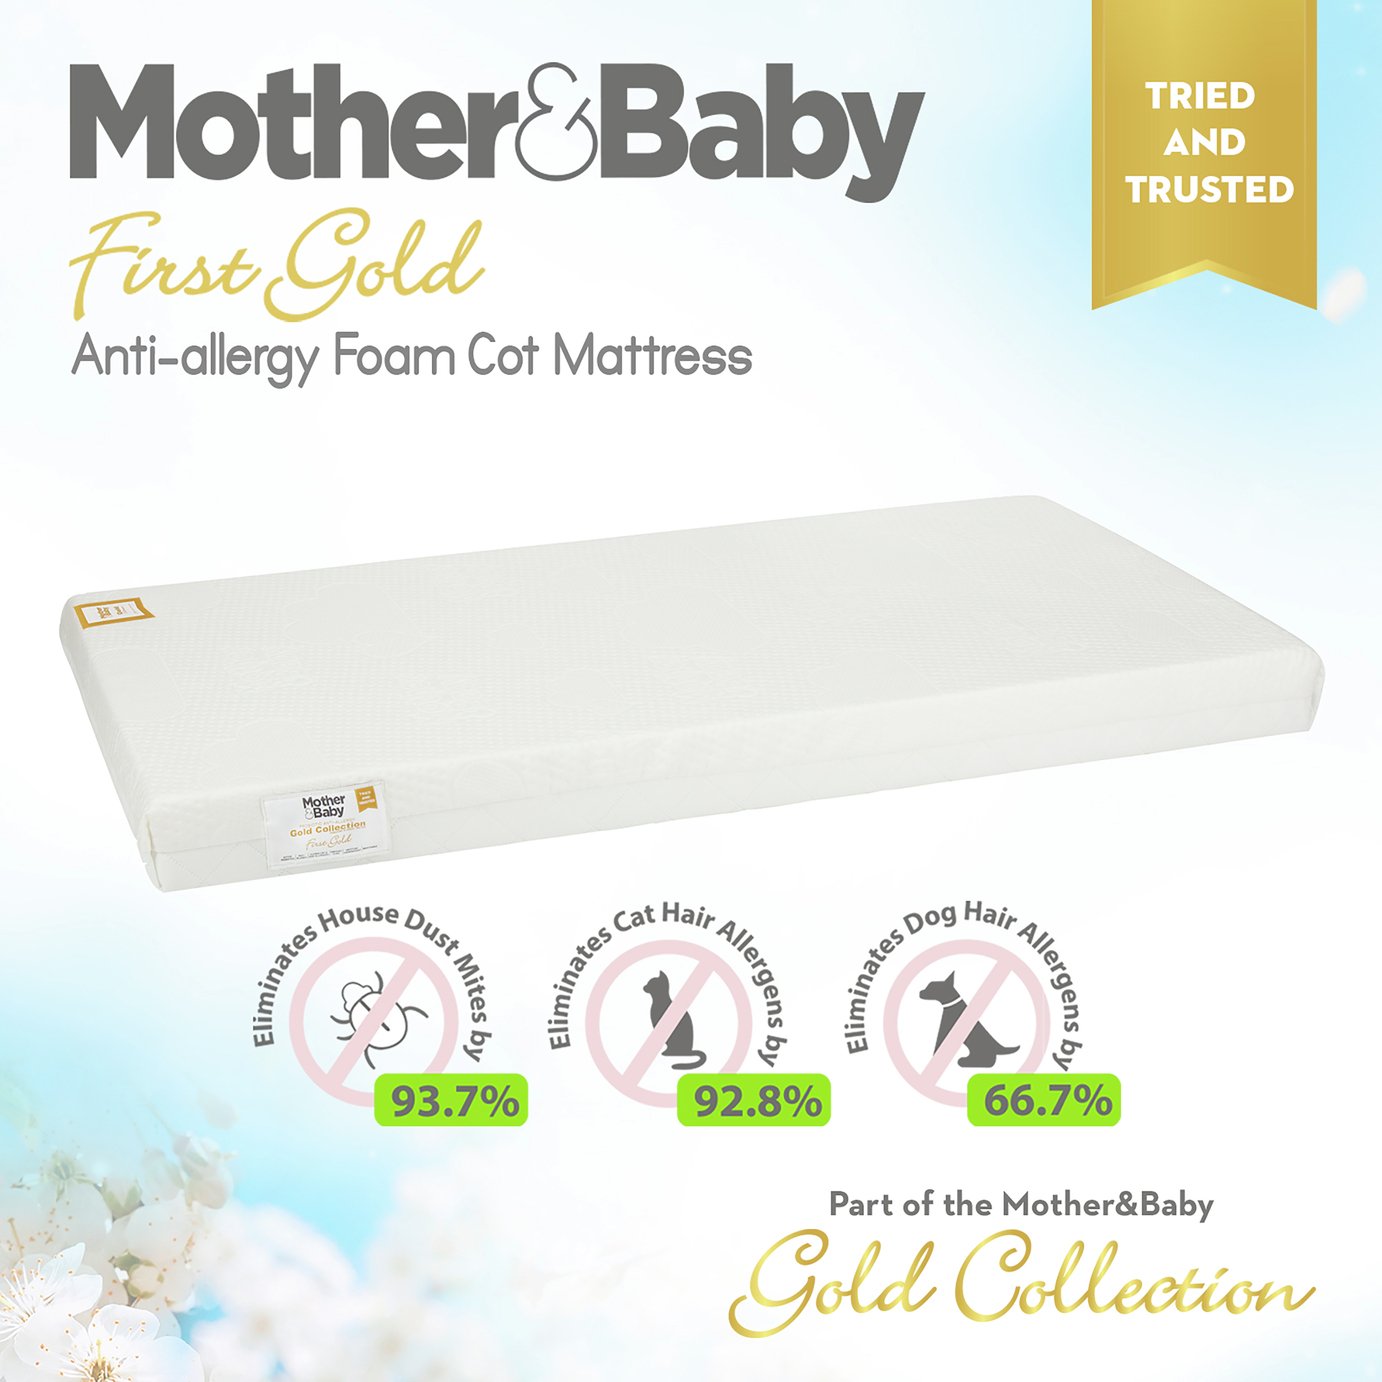 Mother&Baby 120 x 60cm Anti-Allergy Foam Cot Mattress Review